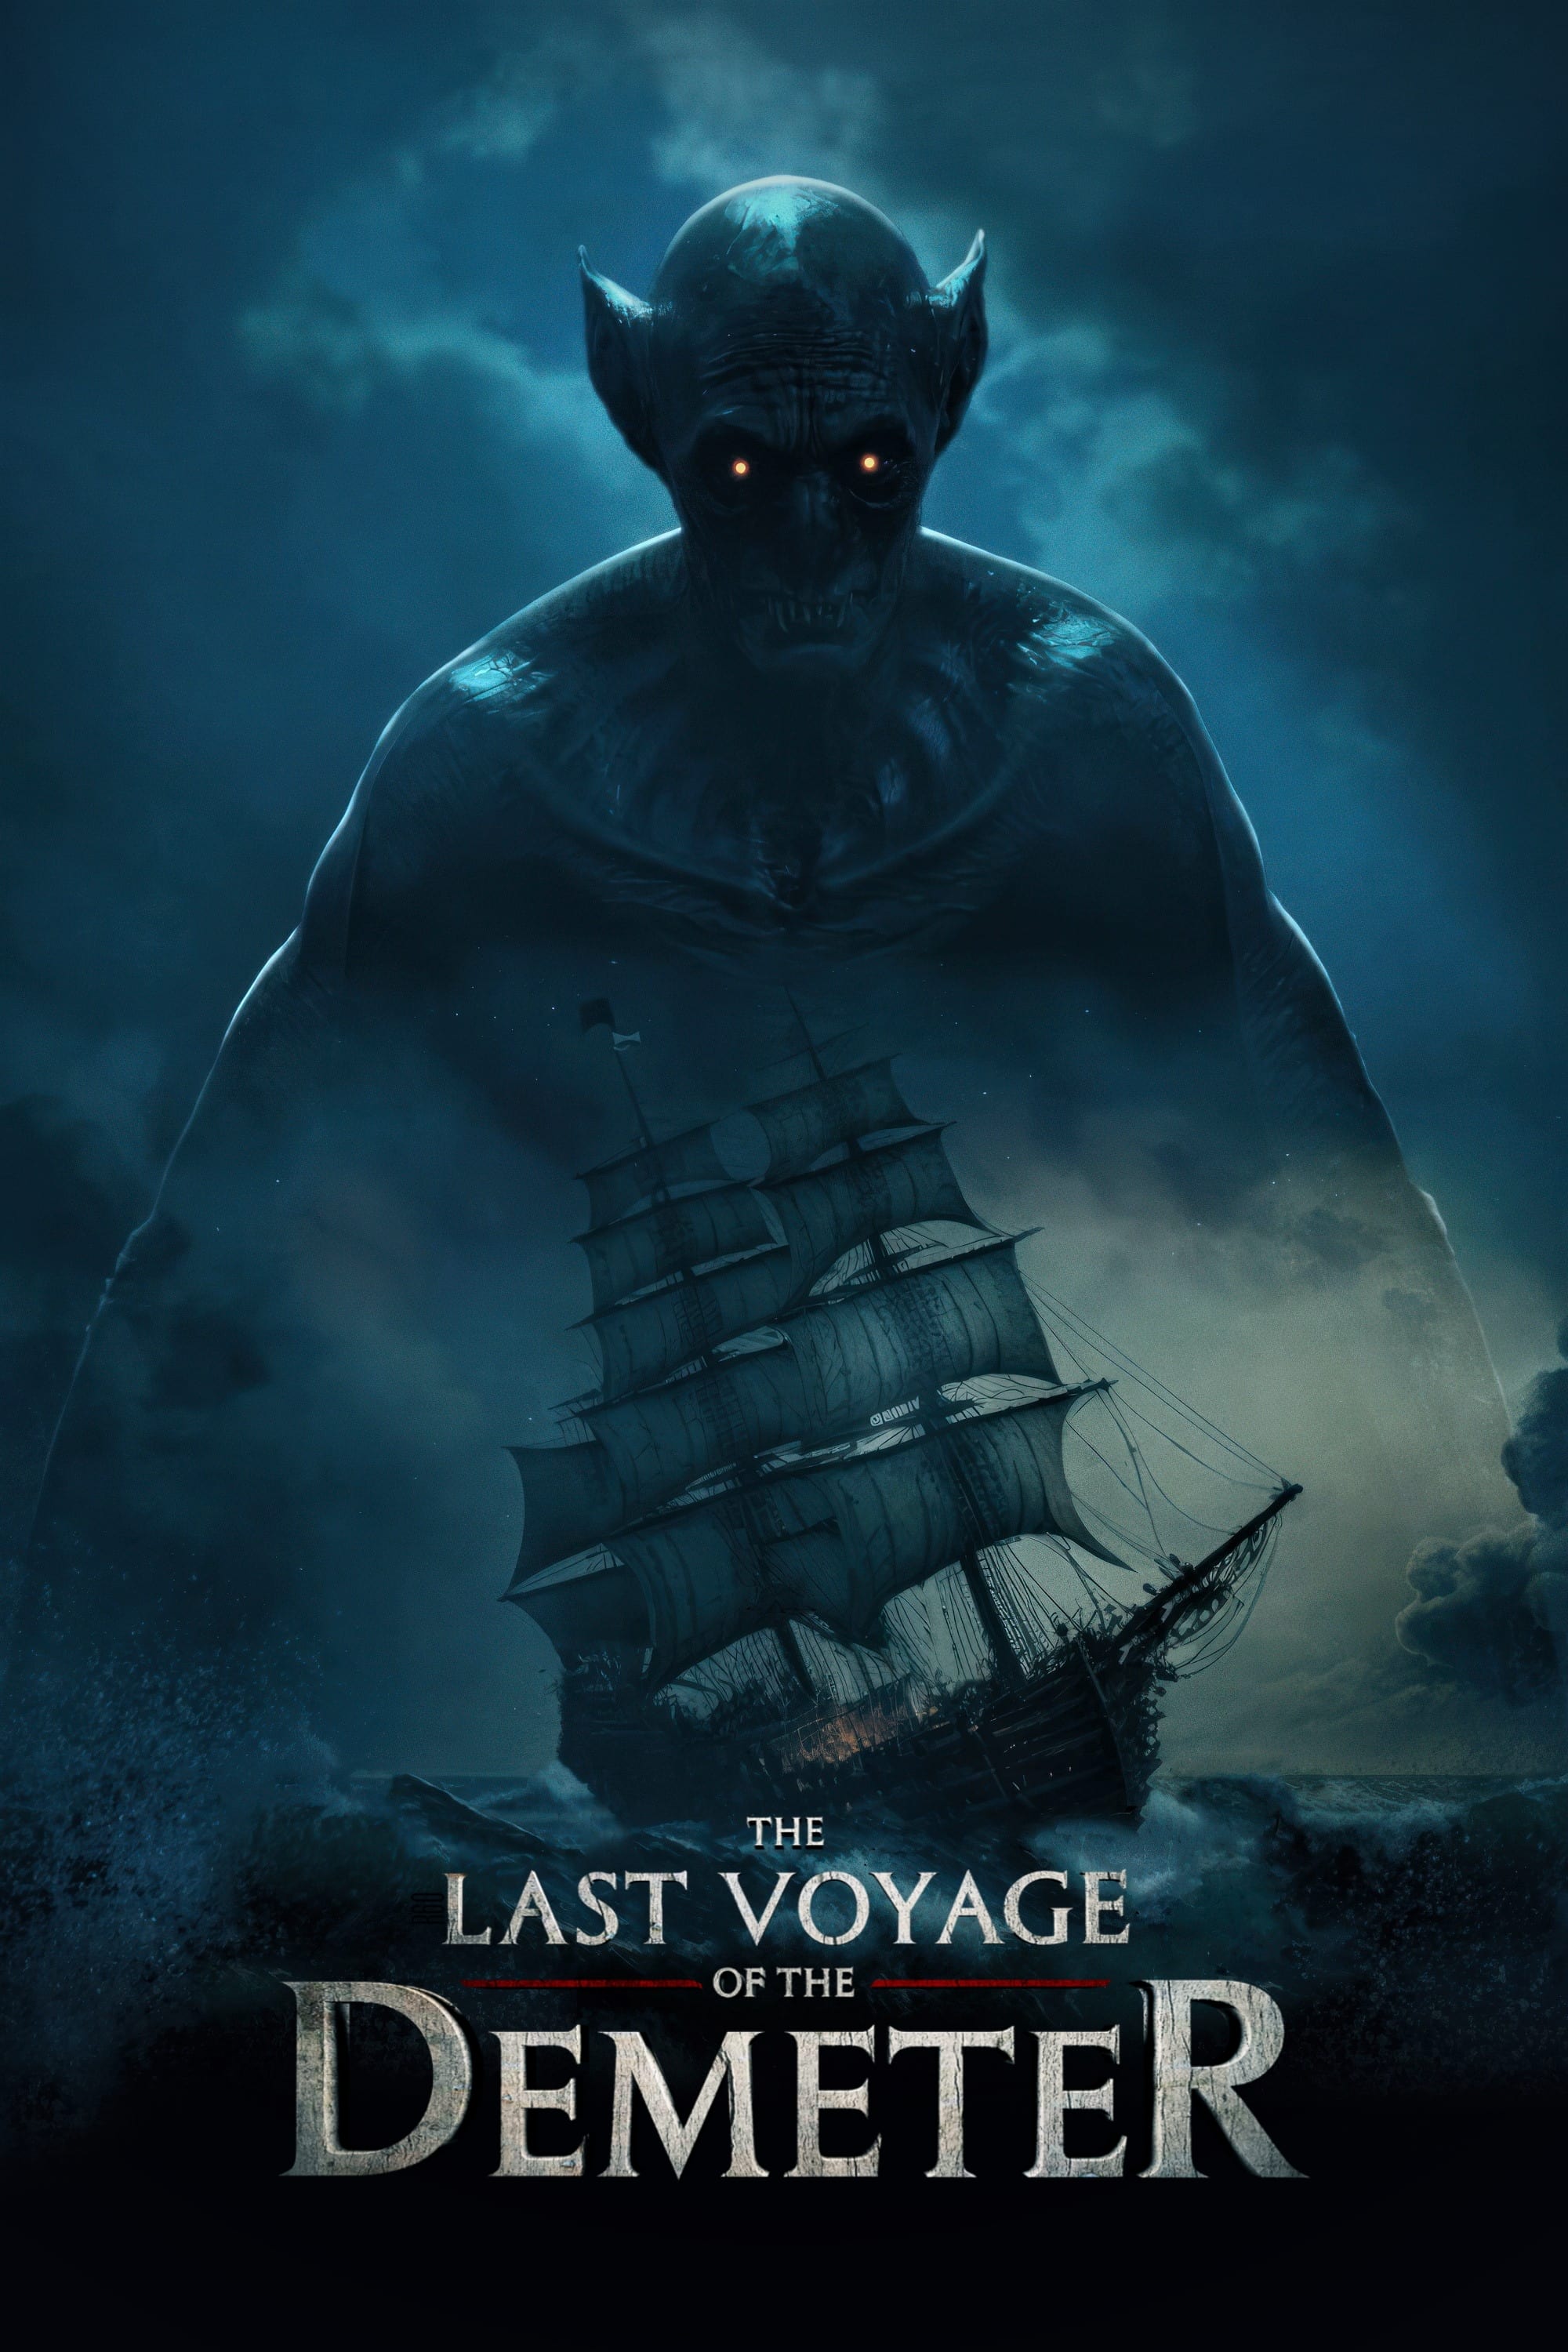 The Last Voyage of the Demeter Epic Movie